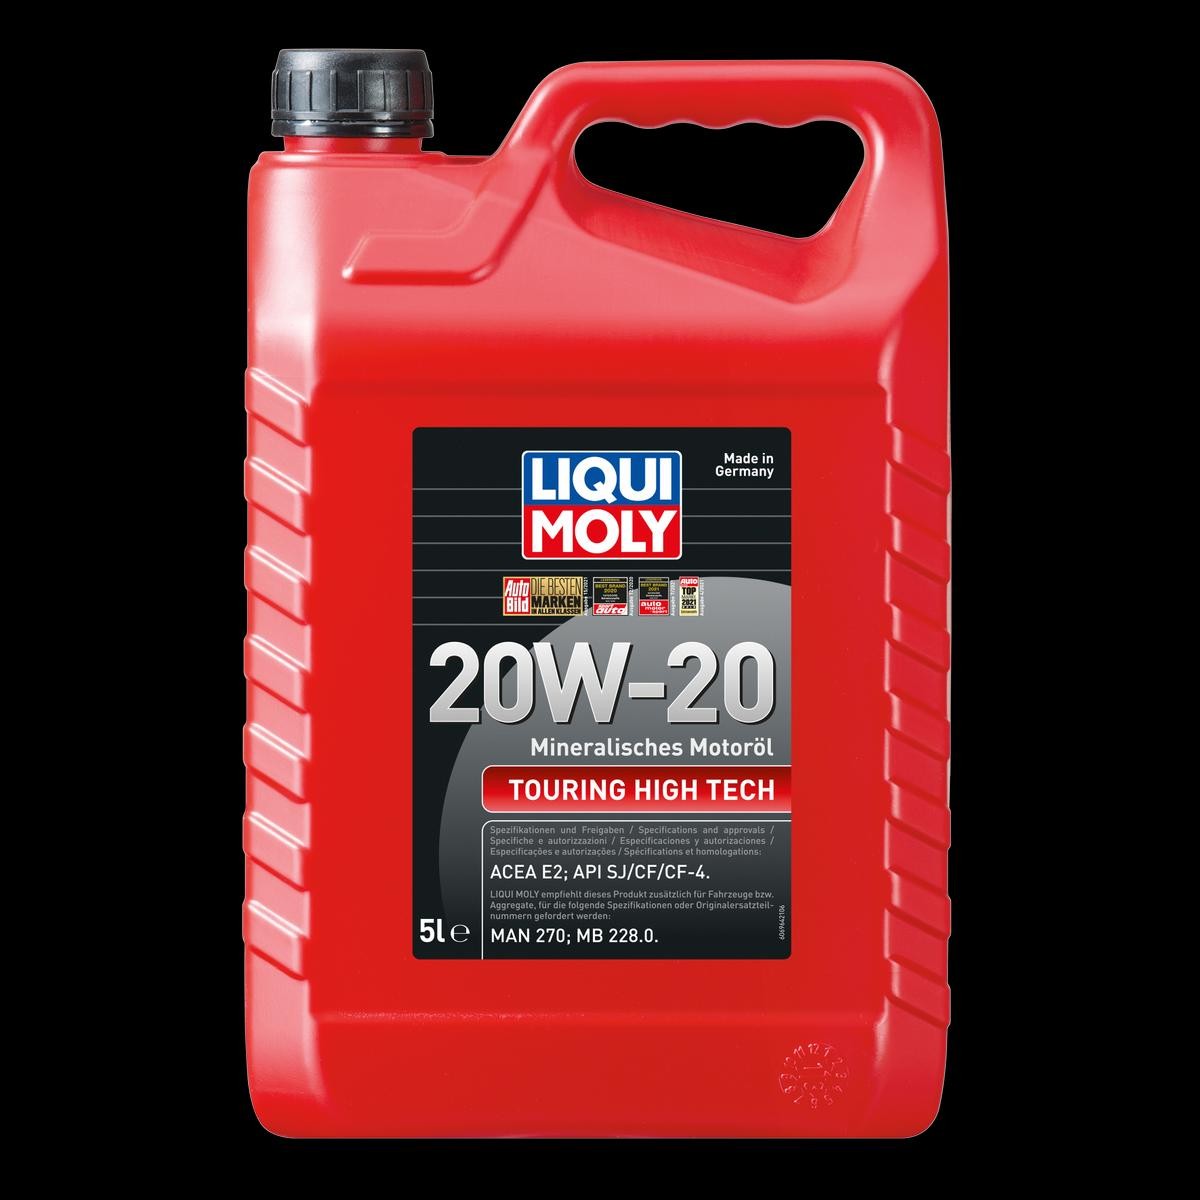 Engine oil 6965 LIQUI MOLY Touring High Tech 20W-20, 20l, Mineral Oil